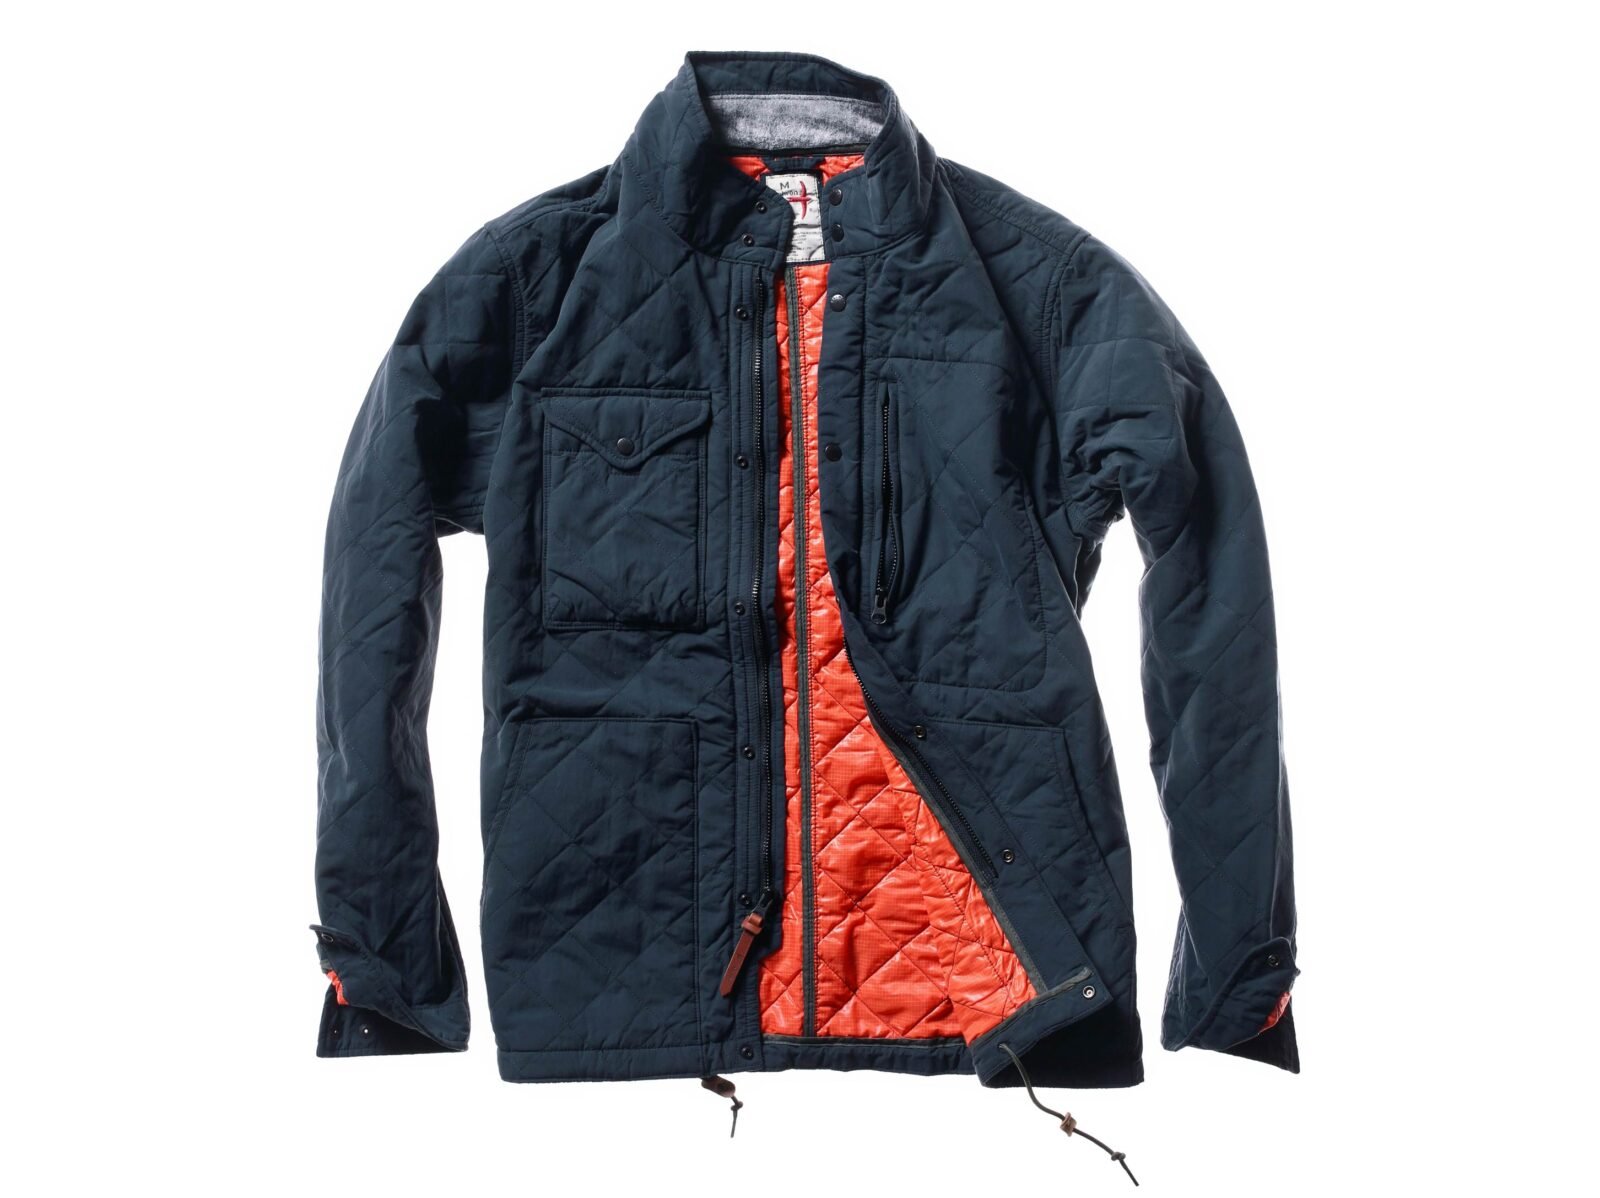 The Relwen Quilted Tanker Jacket